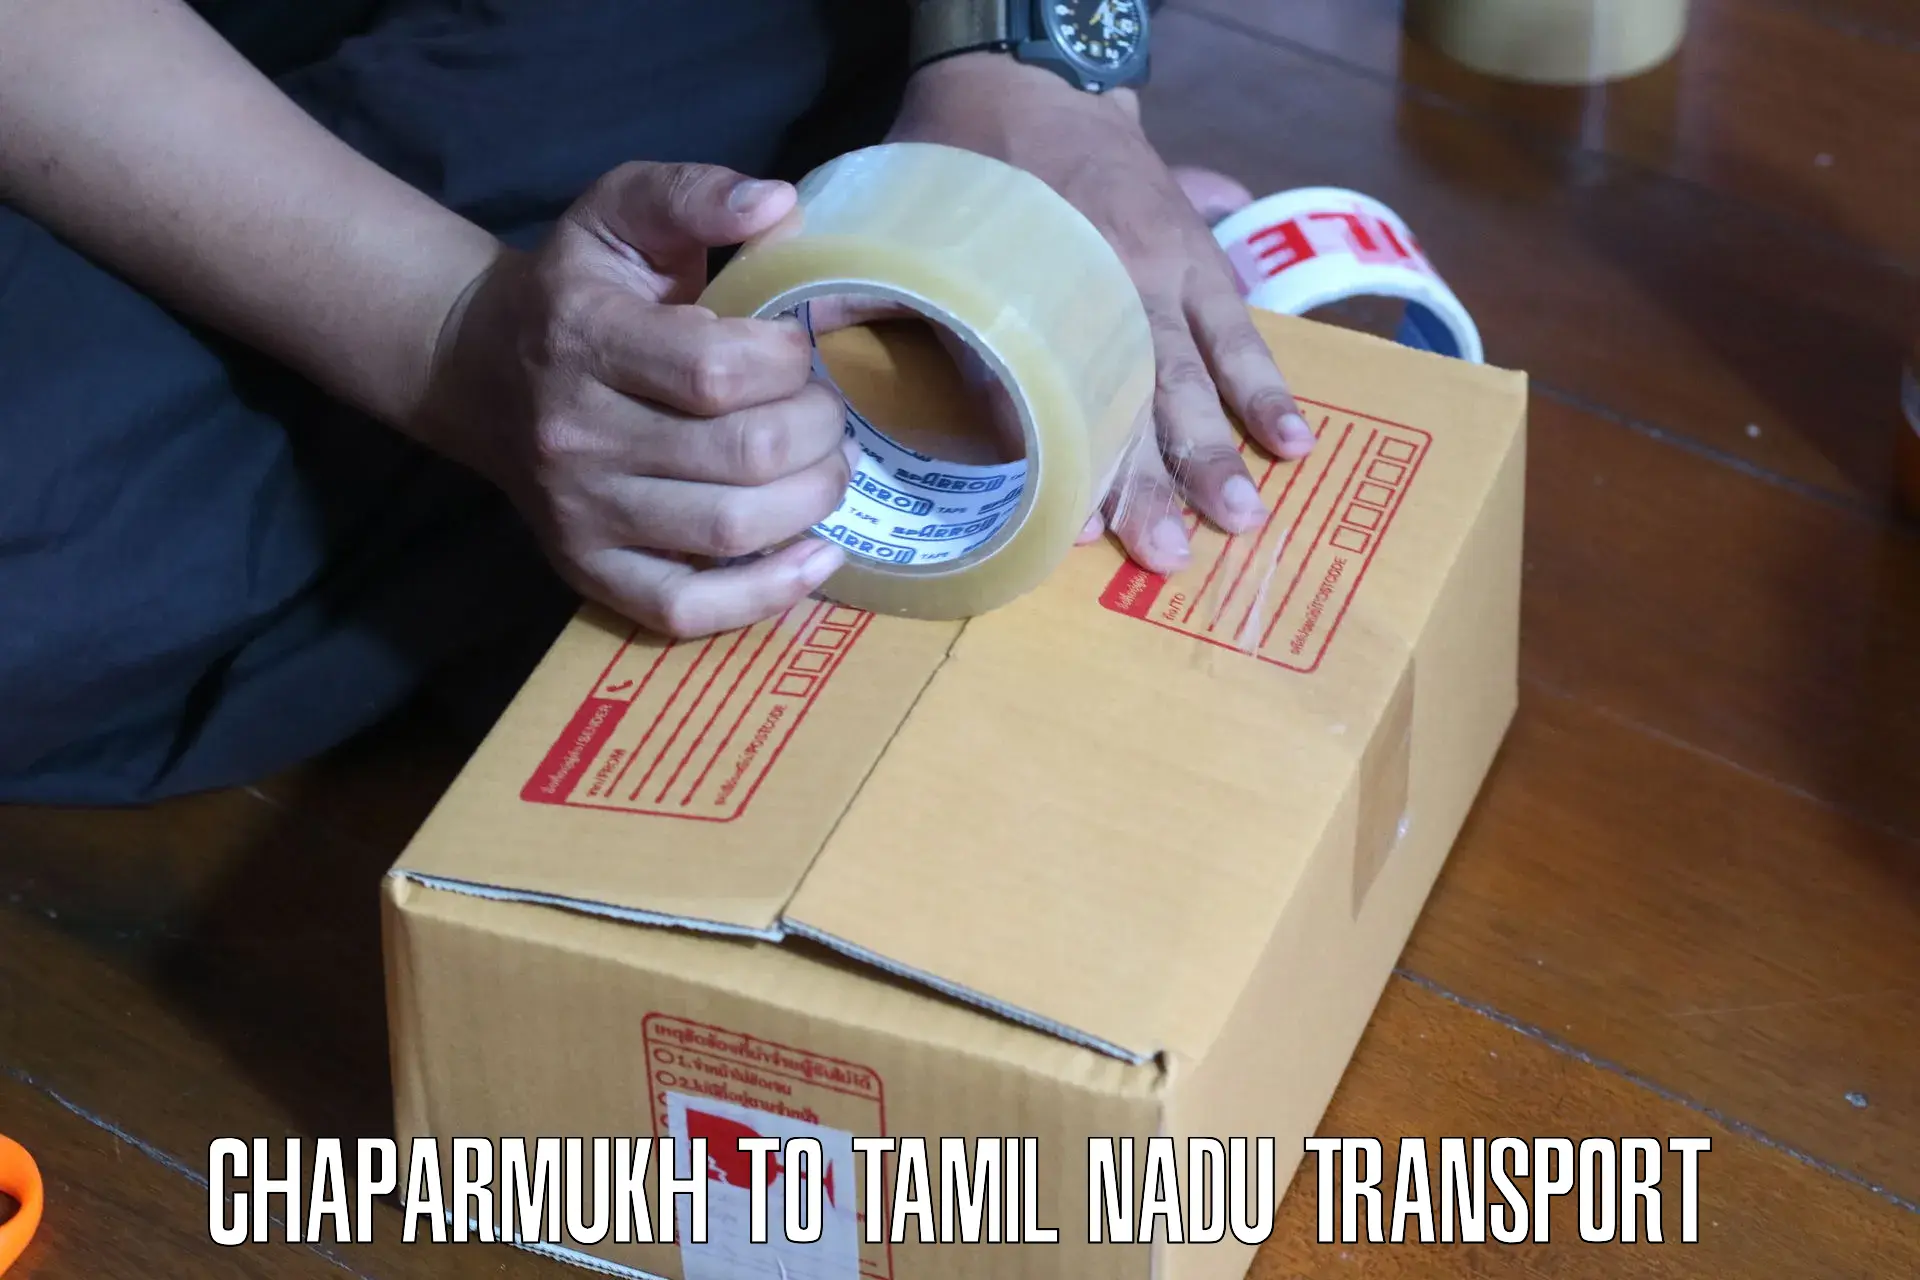 Goods transport services Chaparmukh to Vallioor